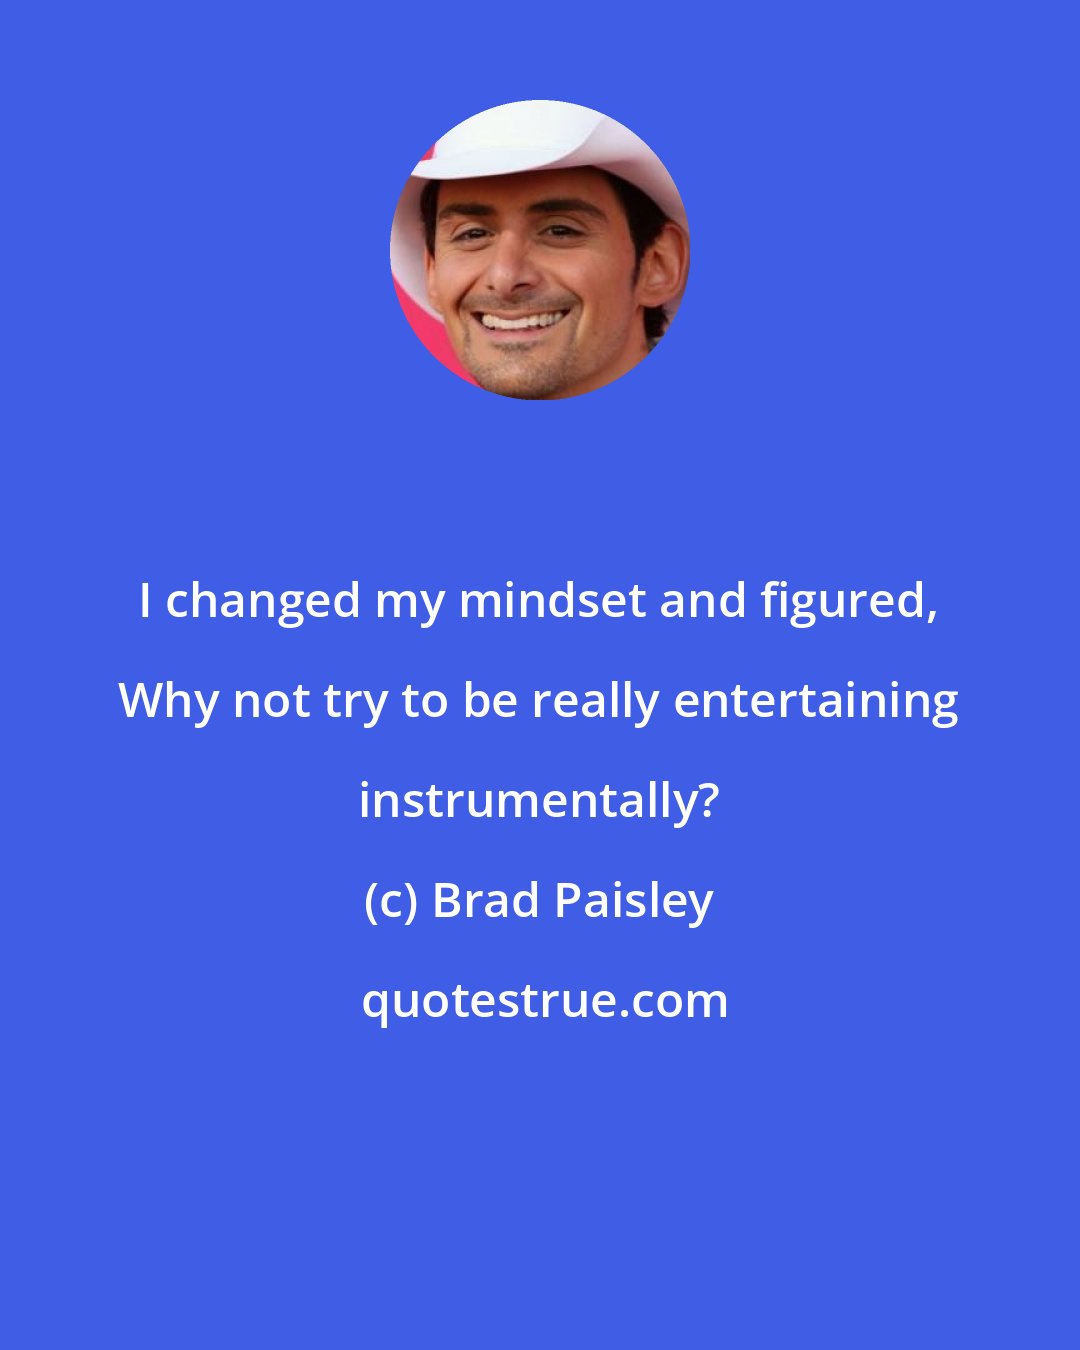 Brad Paisley: I changed my mindset and figured, Why not try to be really entertaining instrumentally?